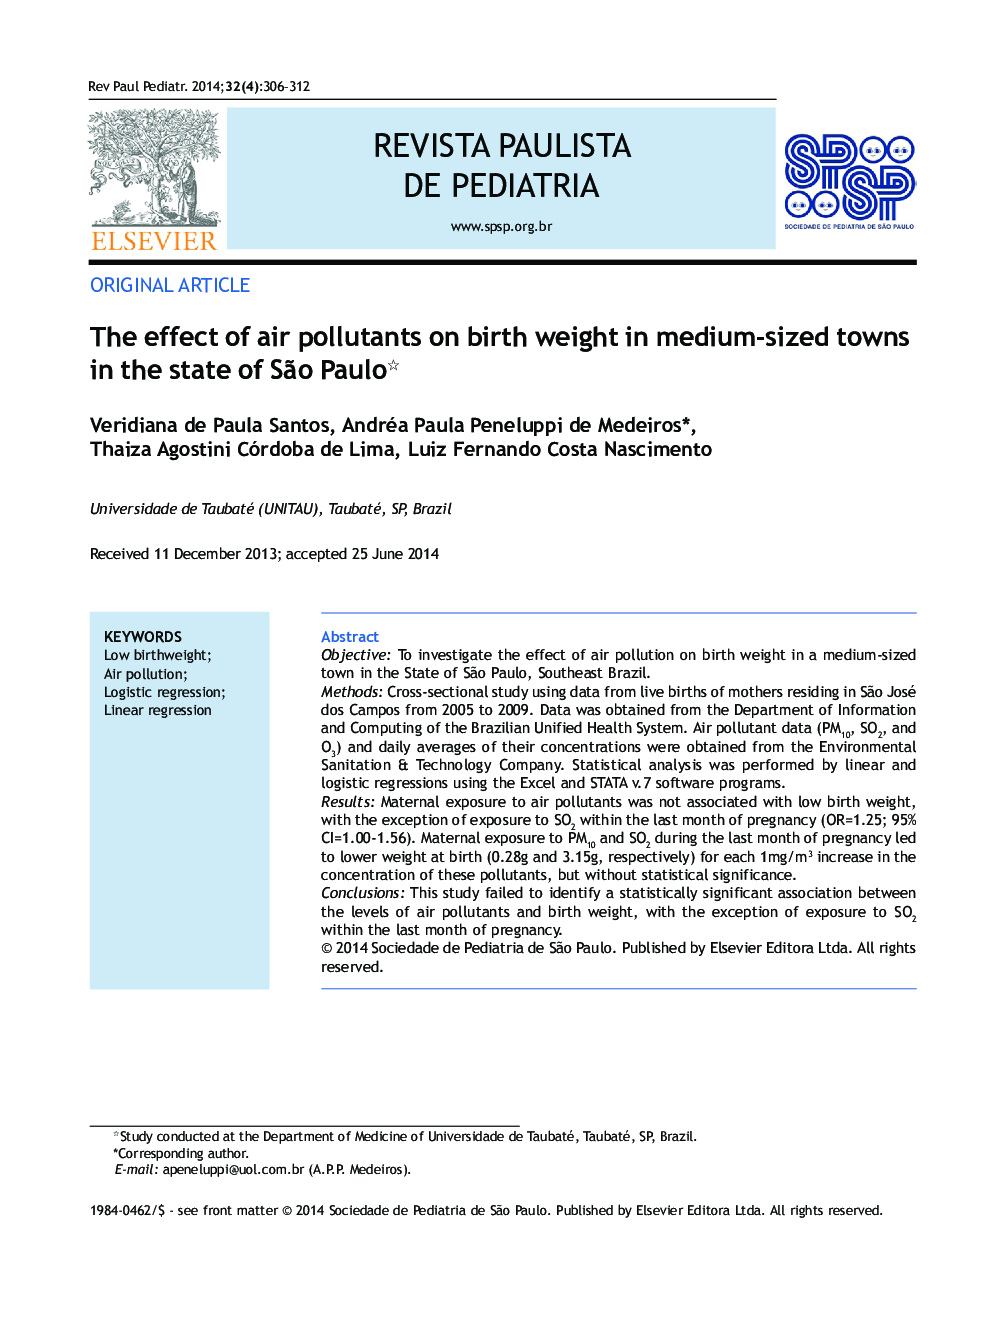 The effect of air pollutants on birth weight in medium-sized towns in the state of São Paulo*